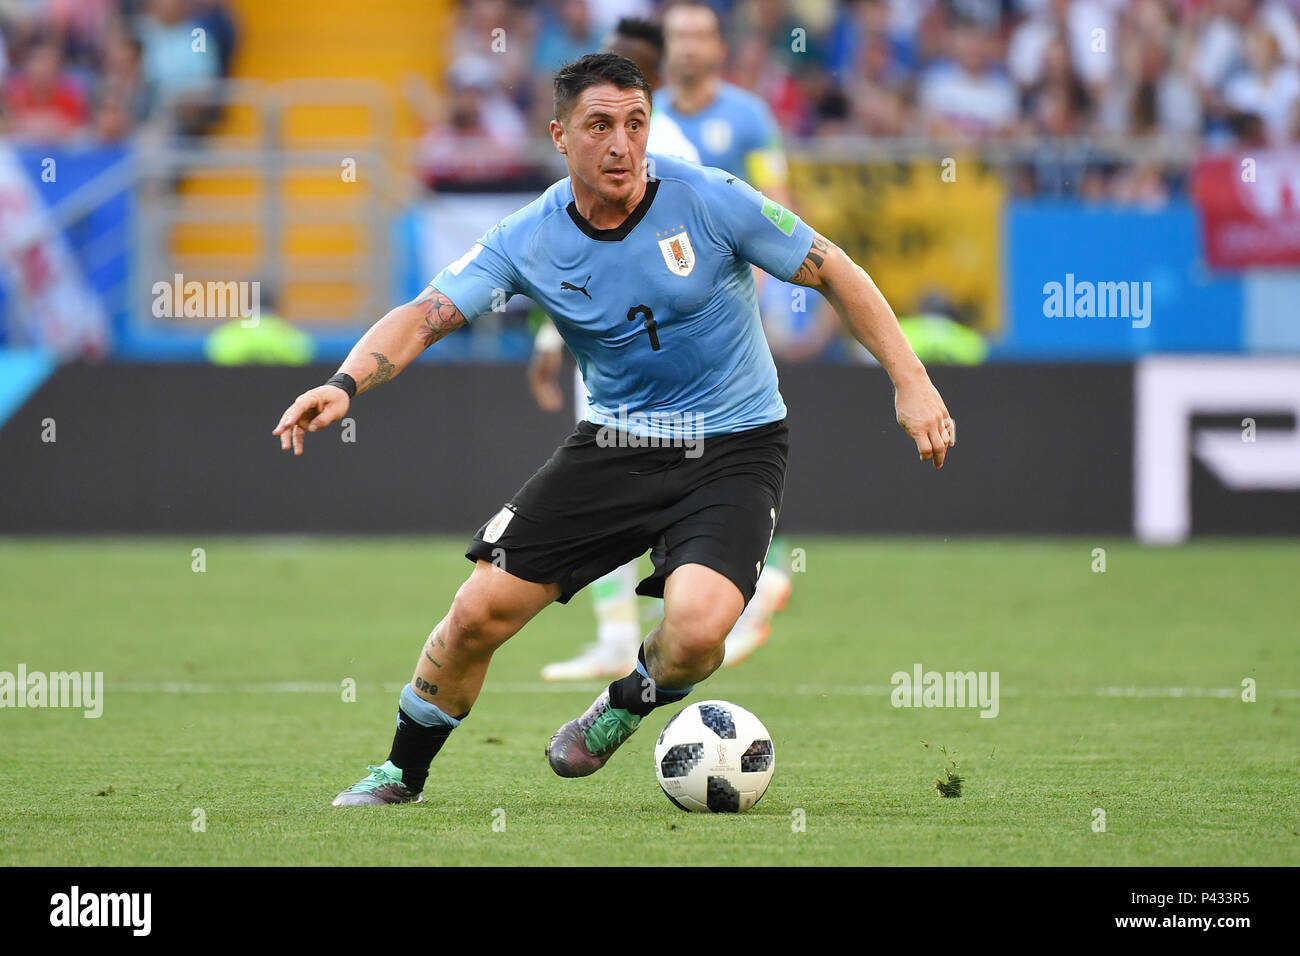 Rostov On Don, Russland. 20th June, 2018. Cristian RODRIGUEZ (URU), Action, Single Action, Frame, Cut Out, Full Body, Whole Figure. Uruguay (Saudi Arabia (KSA) 1-0, preliminary round, group A, match 18, on 20/06/2018 in Rostov-on-Don, Rostov Arena Football World Cup 2018 in Russia from 14.06 - 15.07.2018. | Usage worldwide Credit: dpa/Alamy Live News Stock Photo